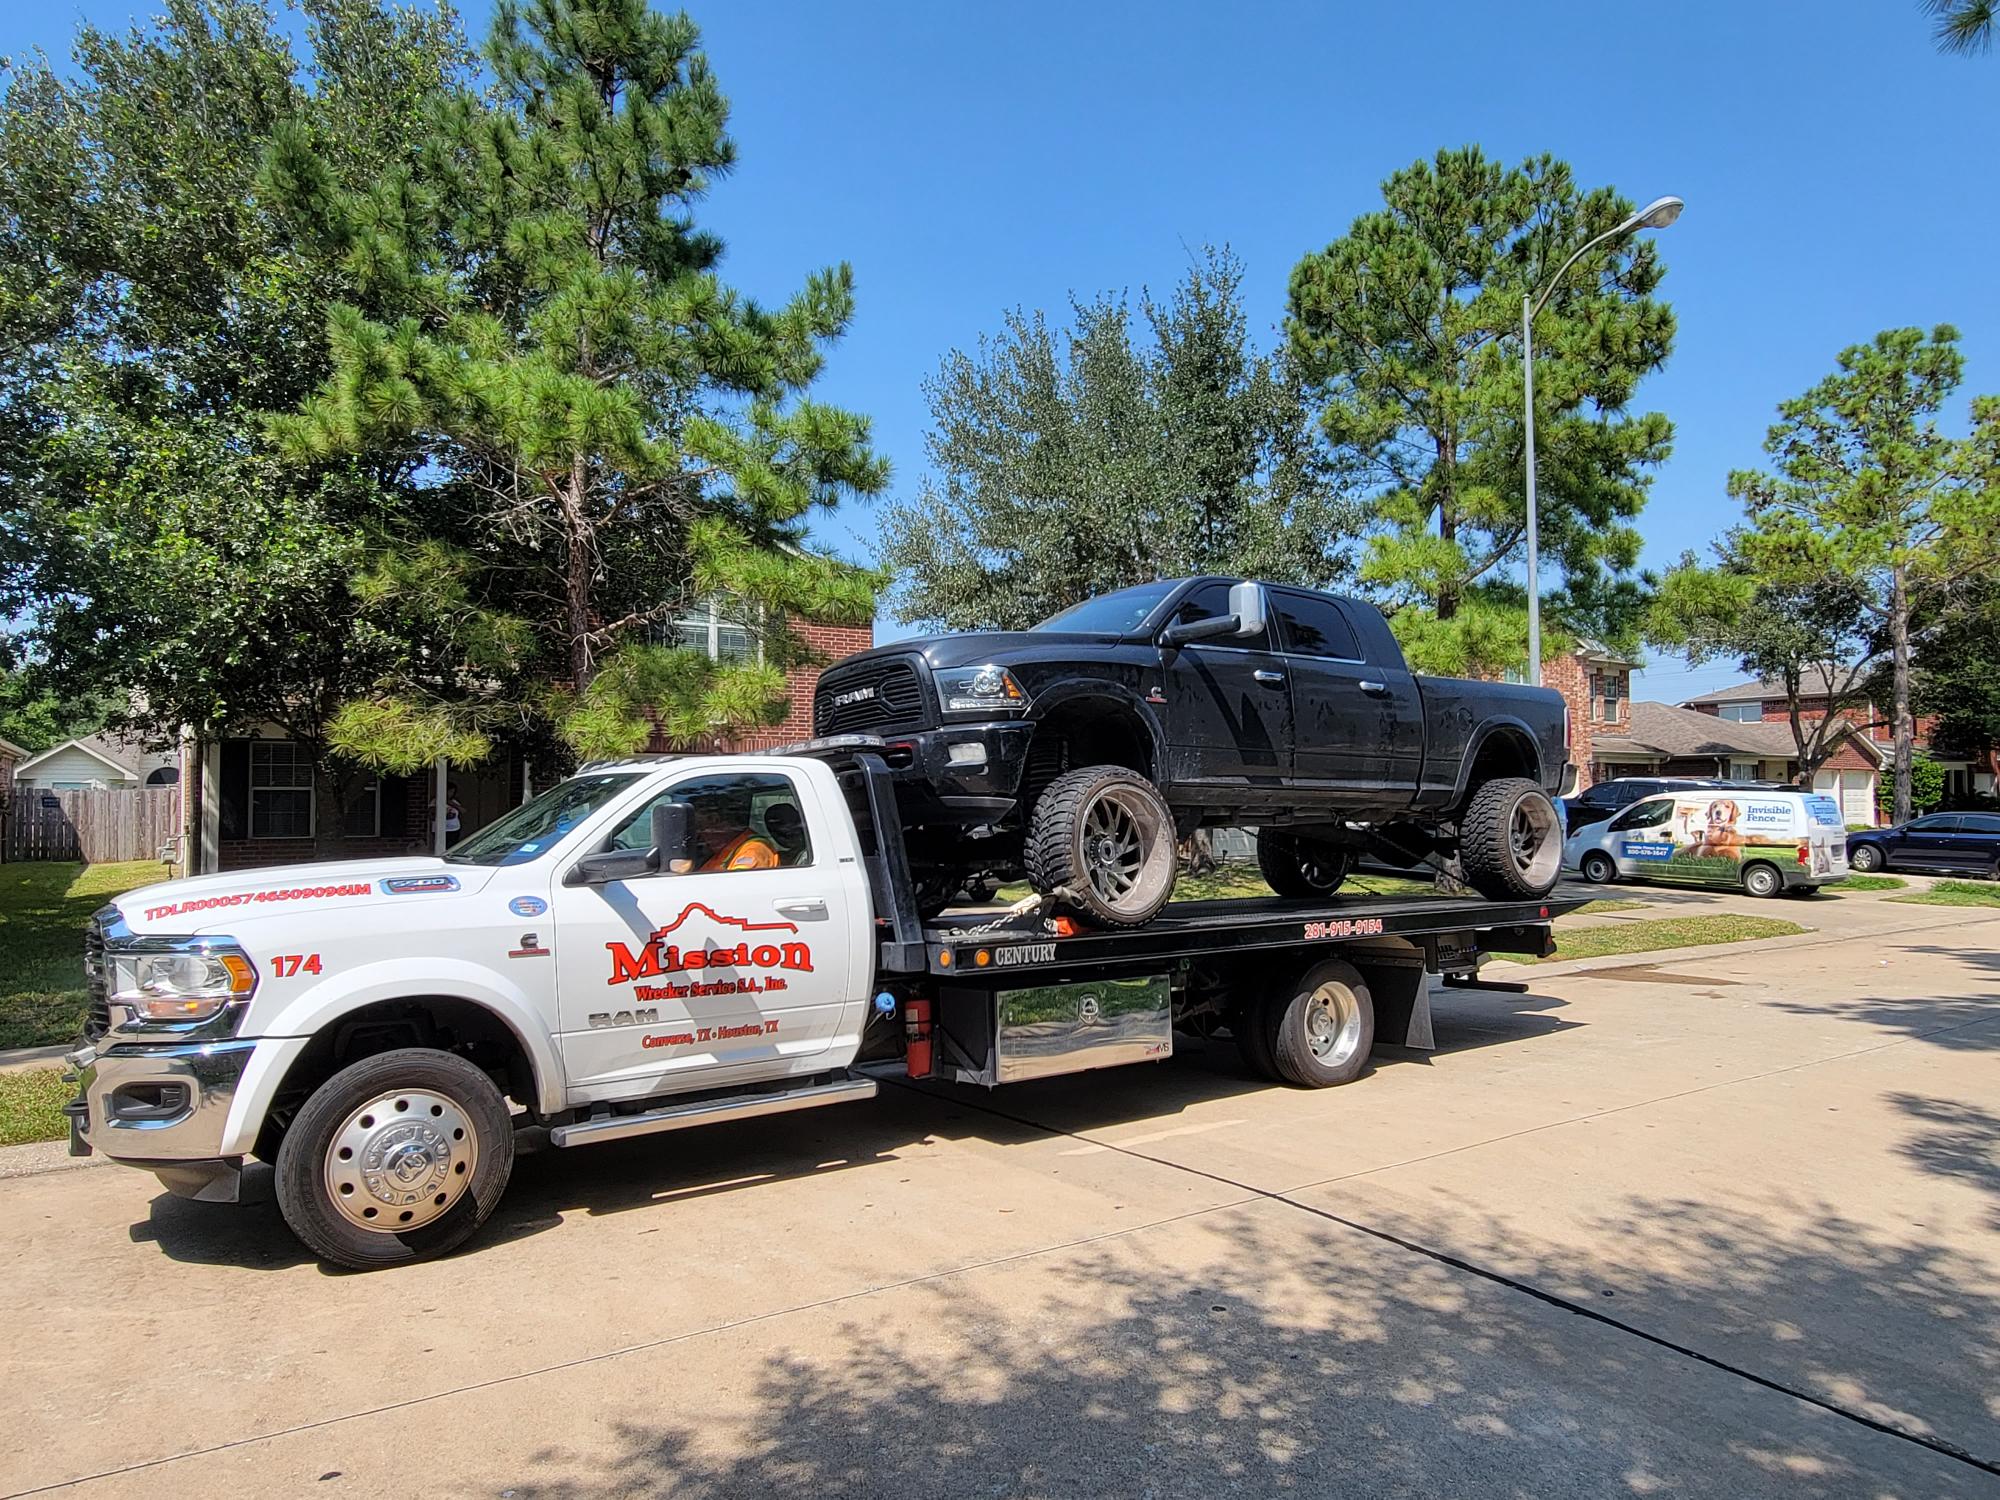 24/7 Towing Company in Boldtville, TX | Tow Truck Near Me